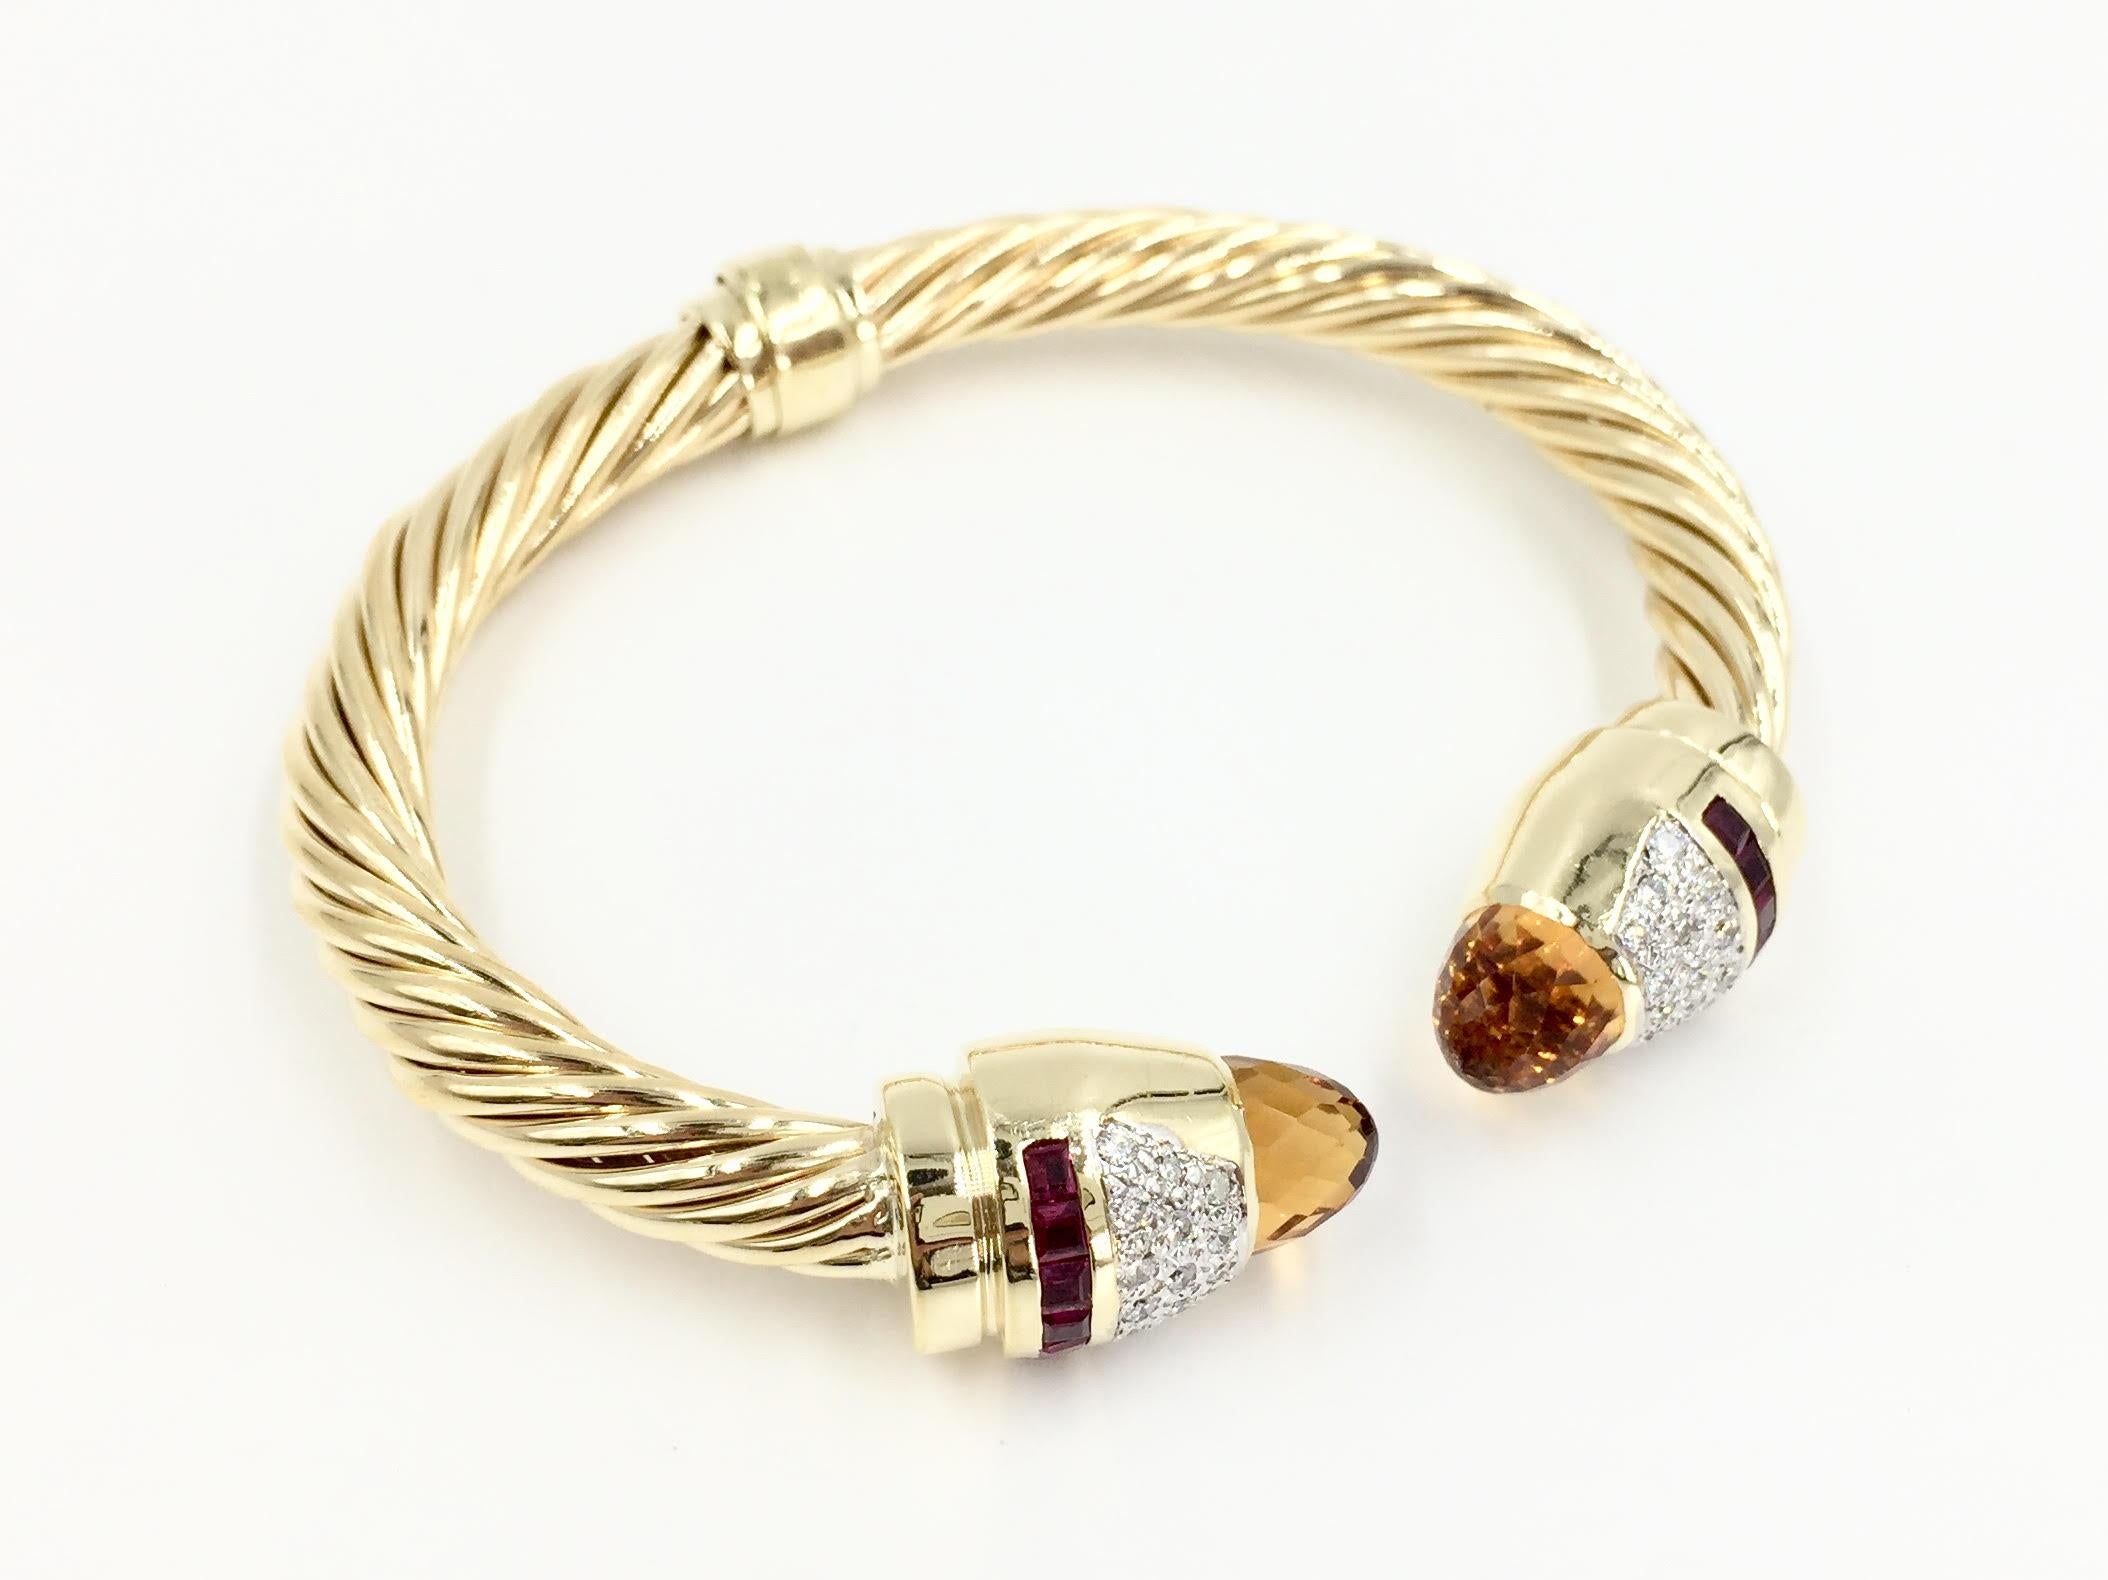 14 Karat Gold Diamond, Citrine and Rubellite Cable Cuff Bracelet In Excellent Condition For Sale In Pikesville, MD